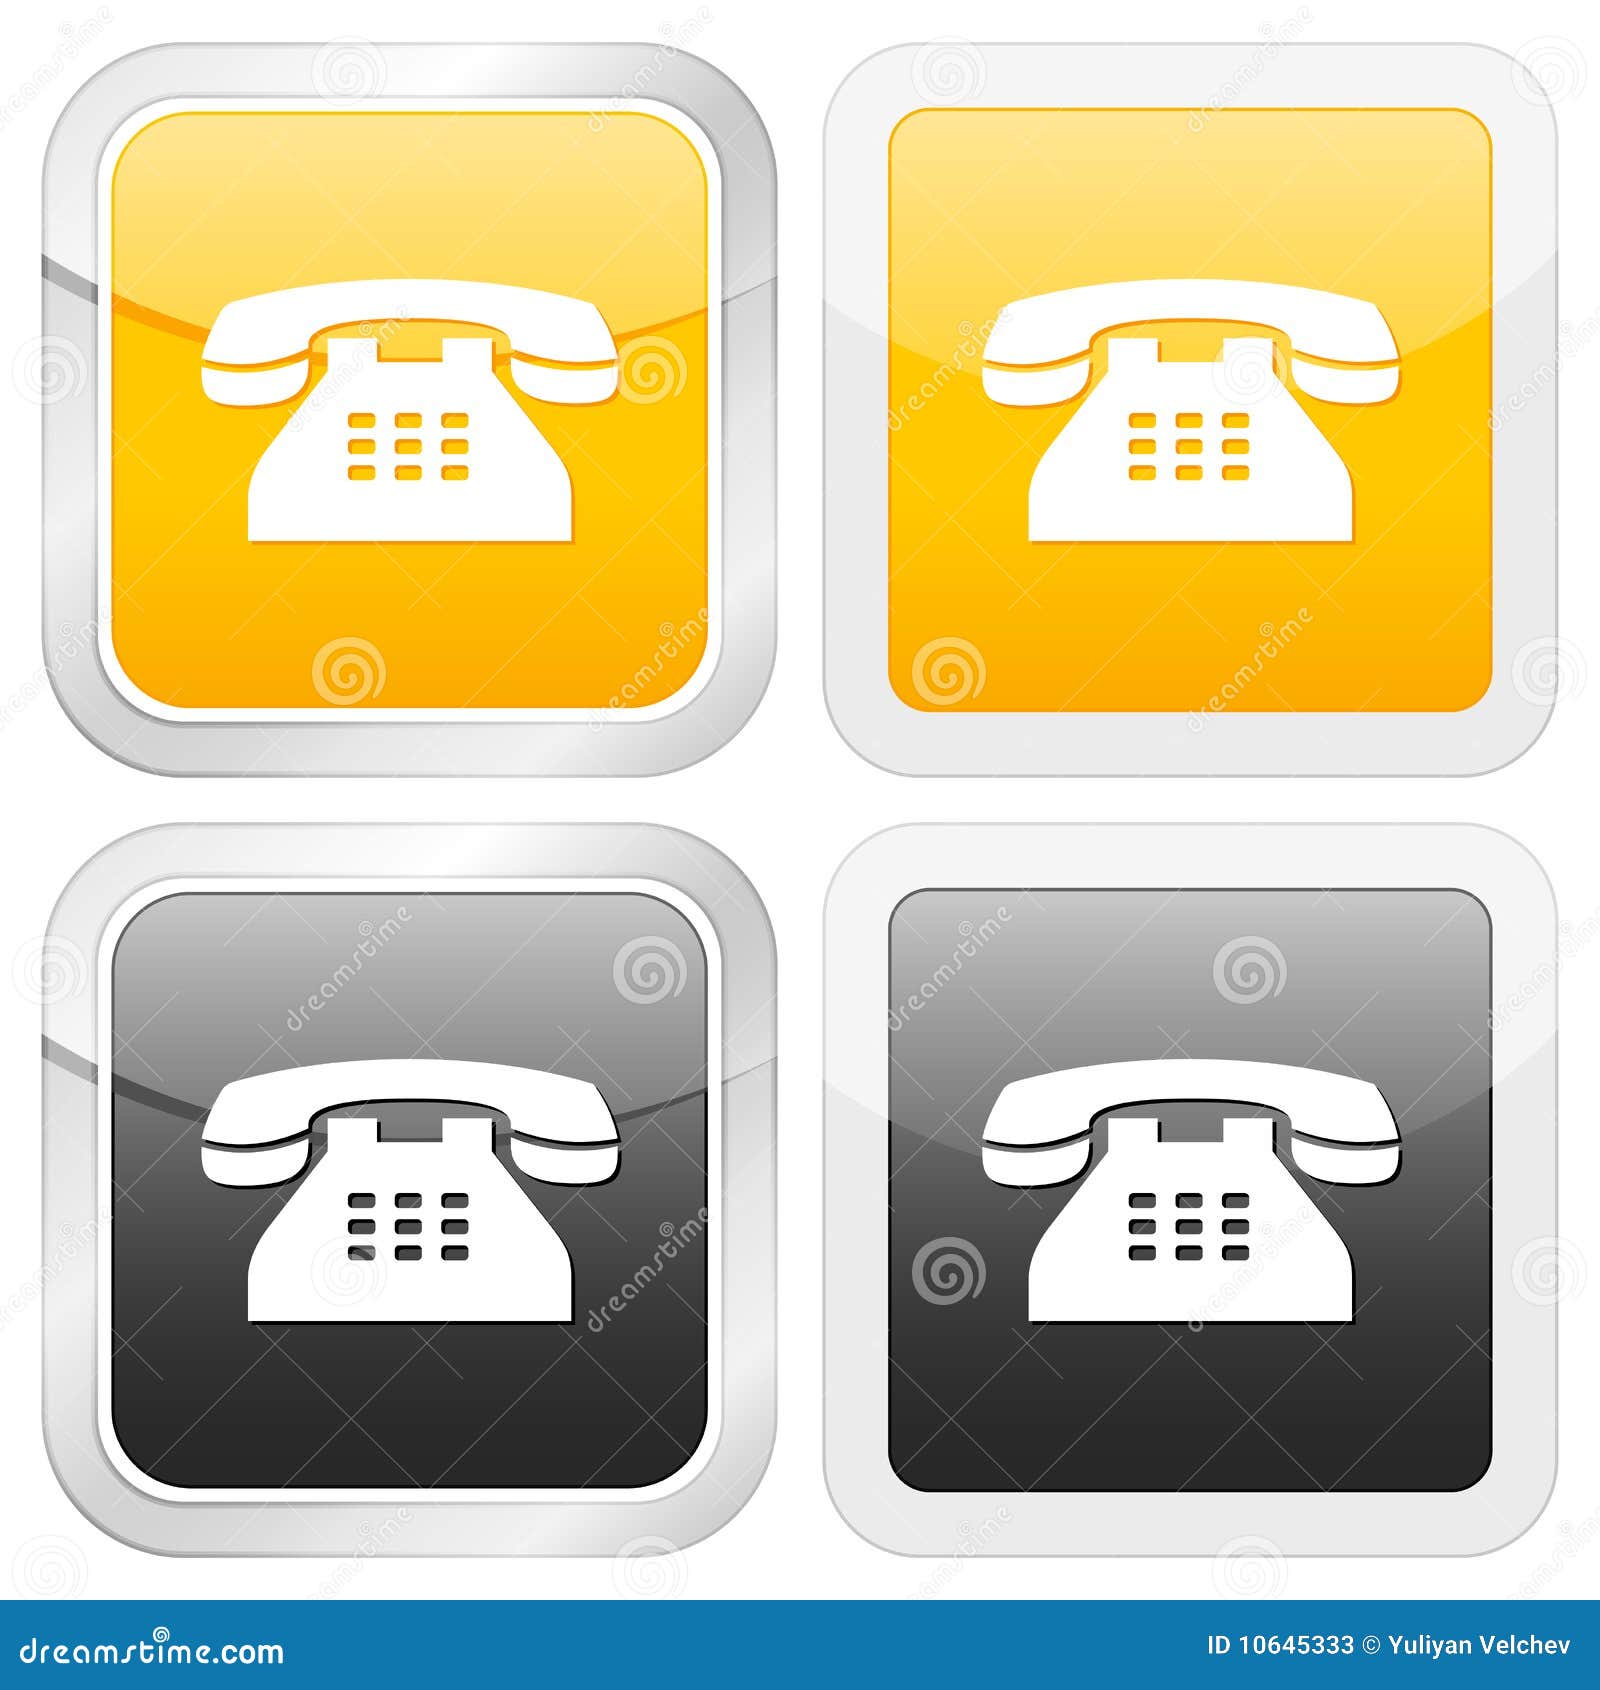 Square icon telephone stock vector. Illustration of reflection - 10645333